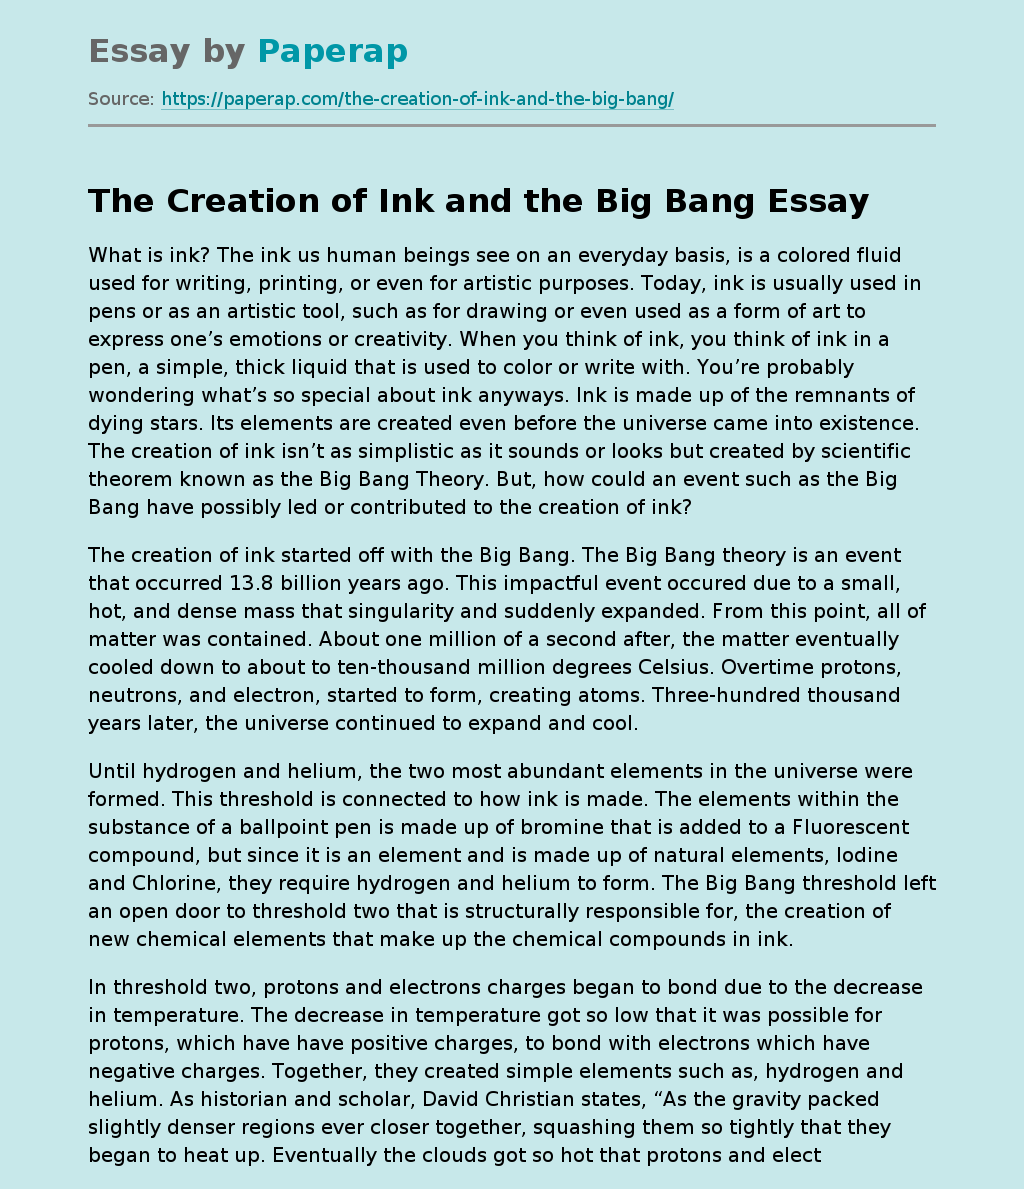 The Creation of Ink and the Big Bang